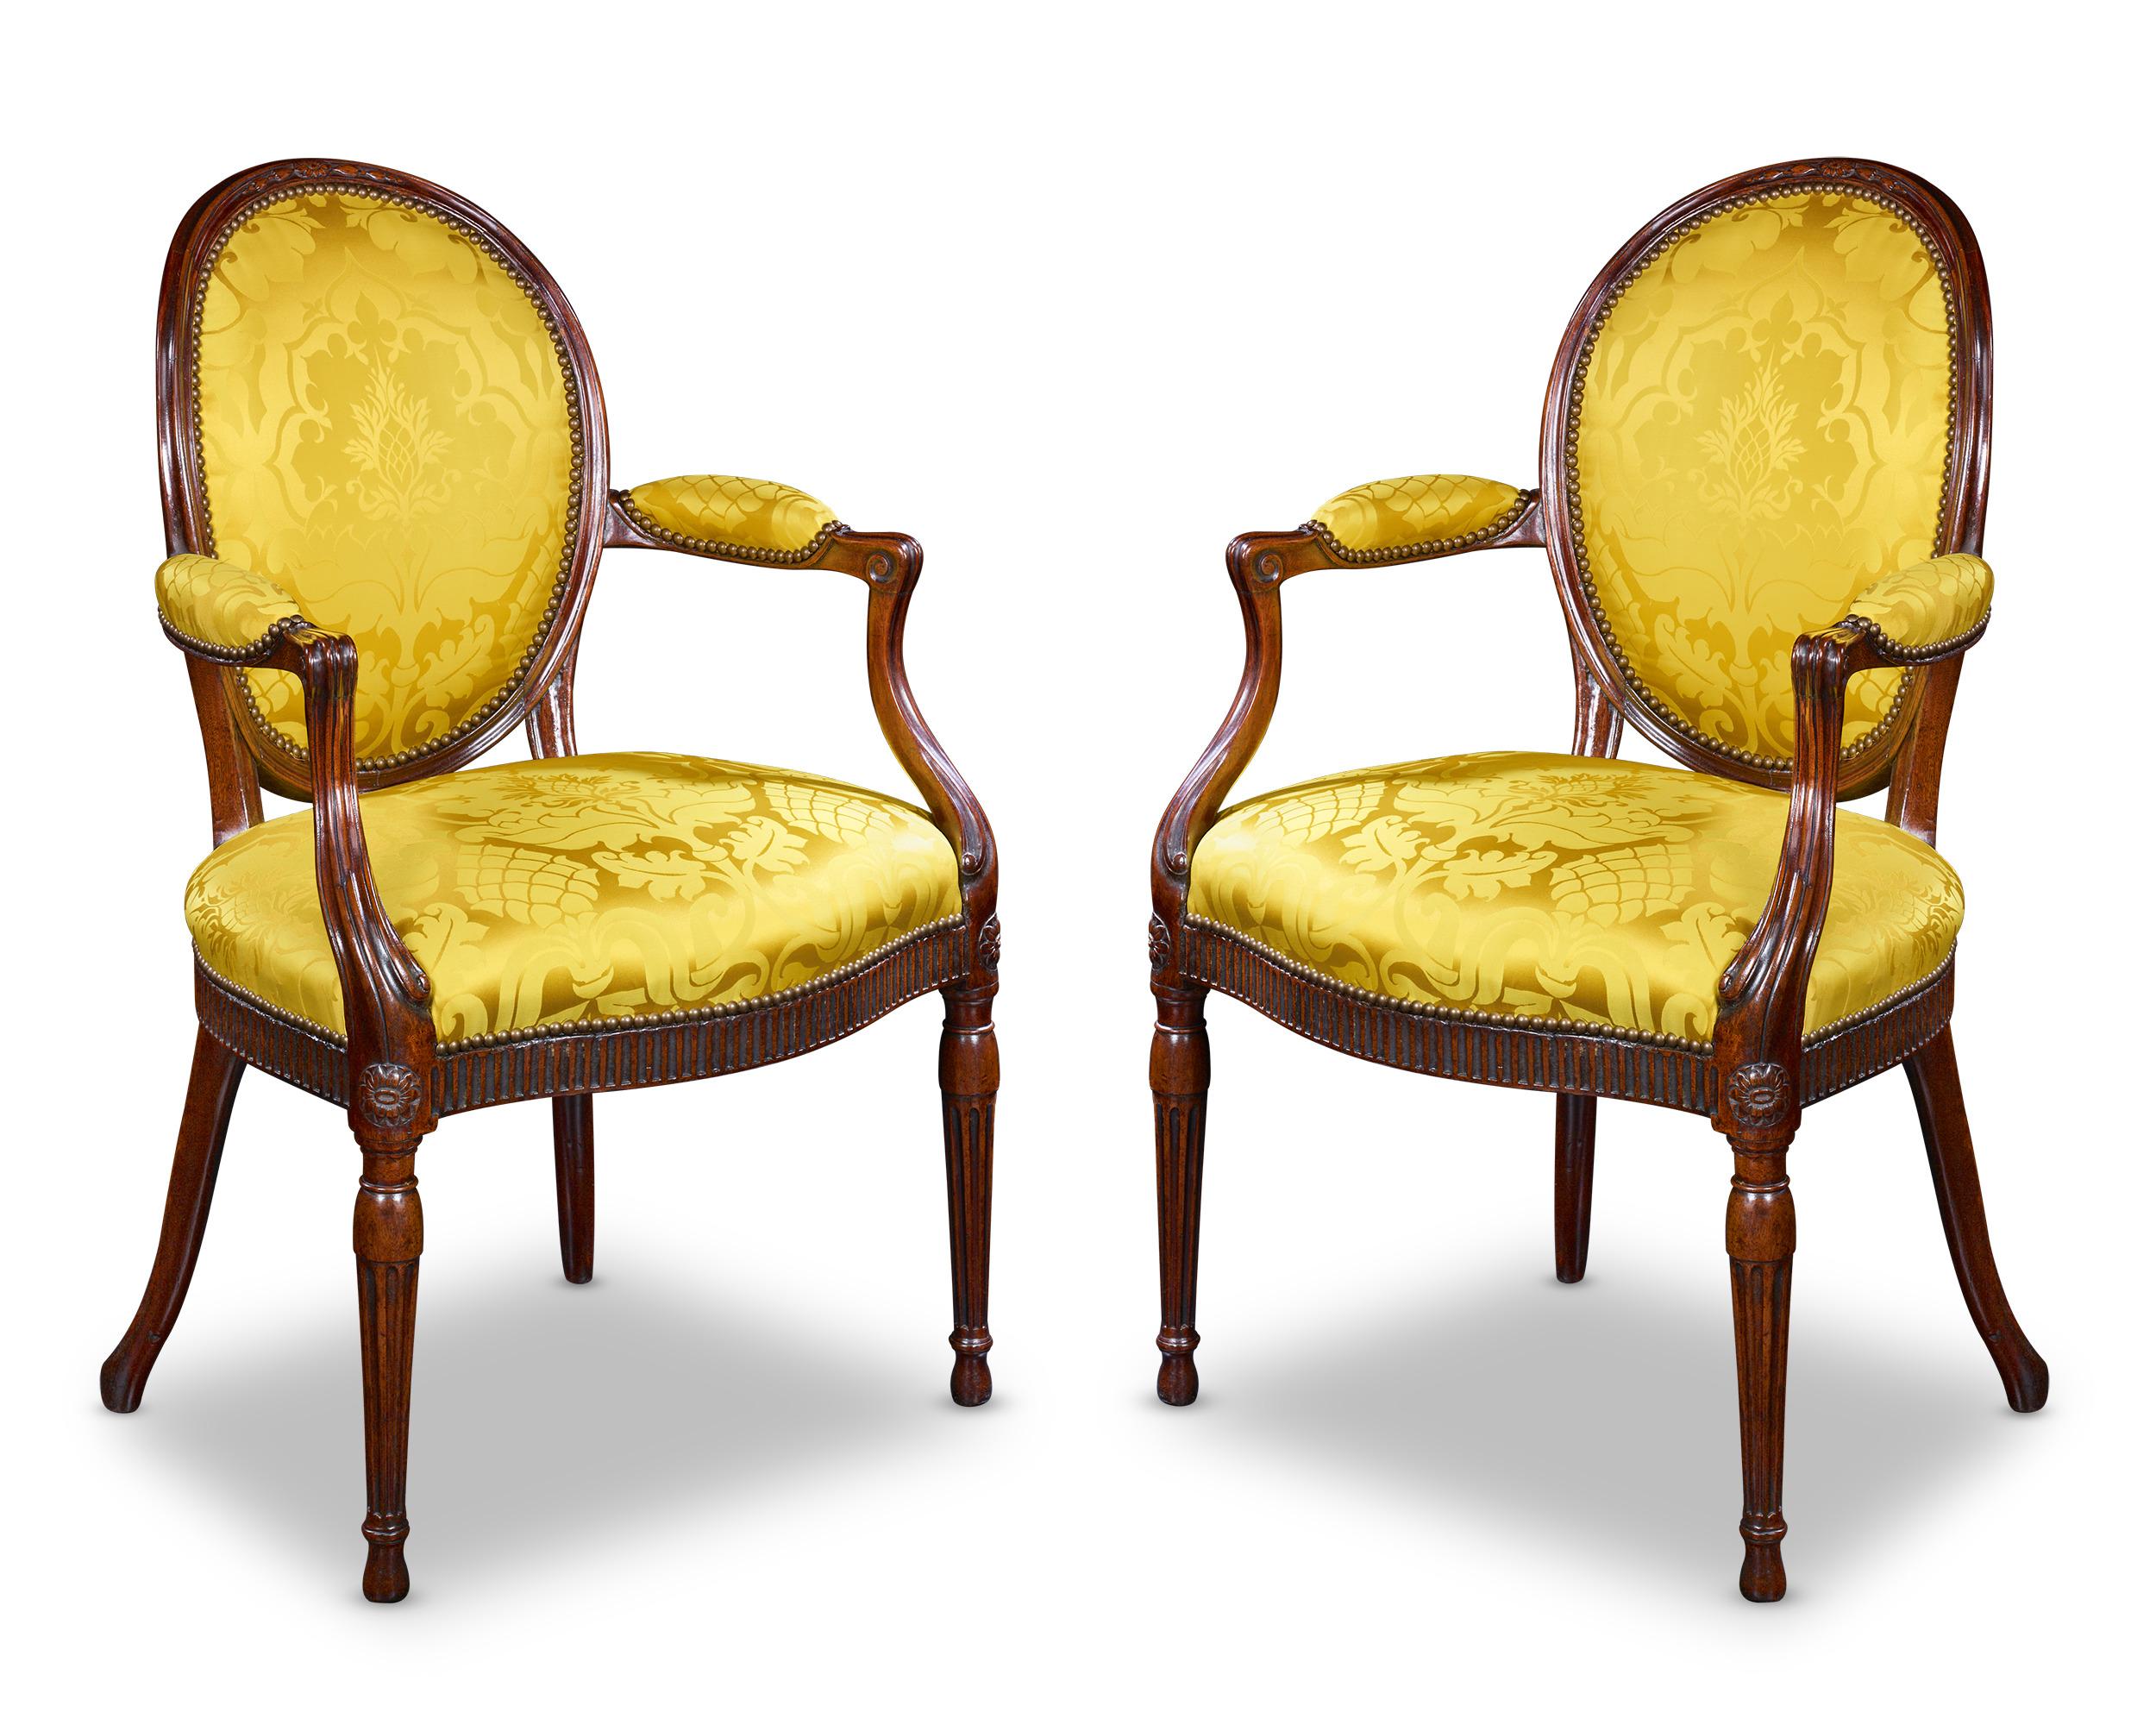 This set of two mahogany chairs was crafted by the inimitable and famed Thomas Chippendale. The yellow upholstered seats complement the deep mahogany beautifully, creating an elegant balance. The talent and genius of Thomas Chippendale's designs